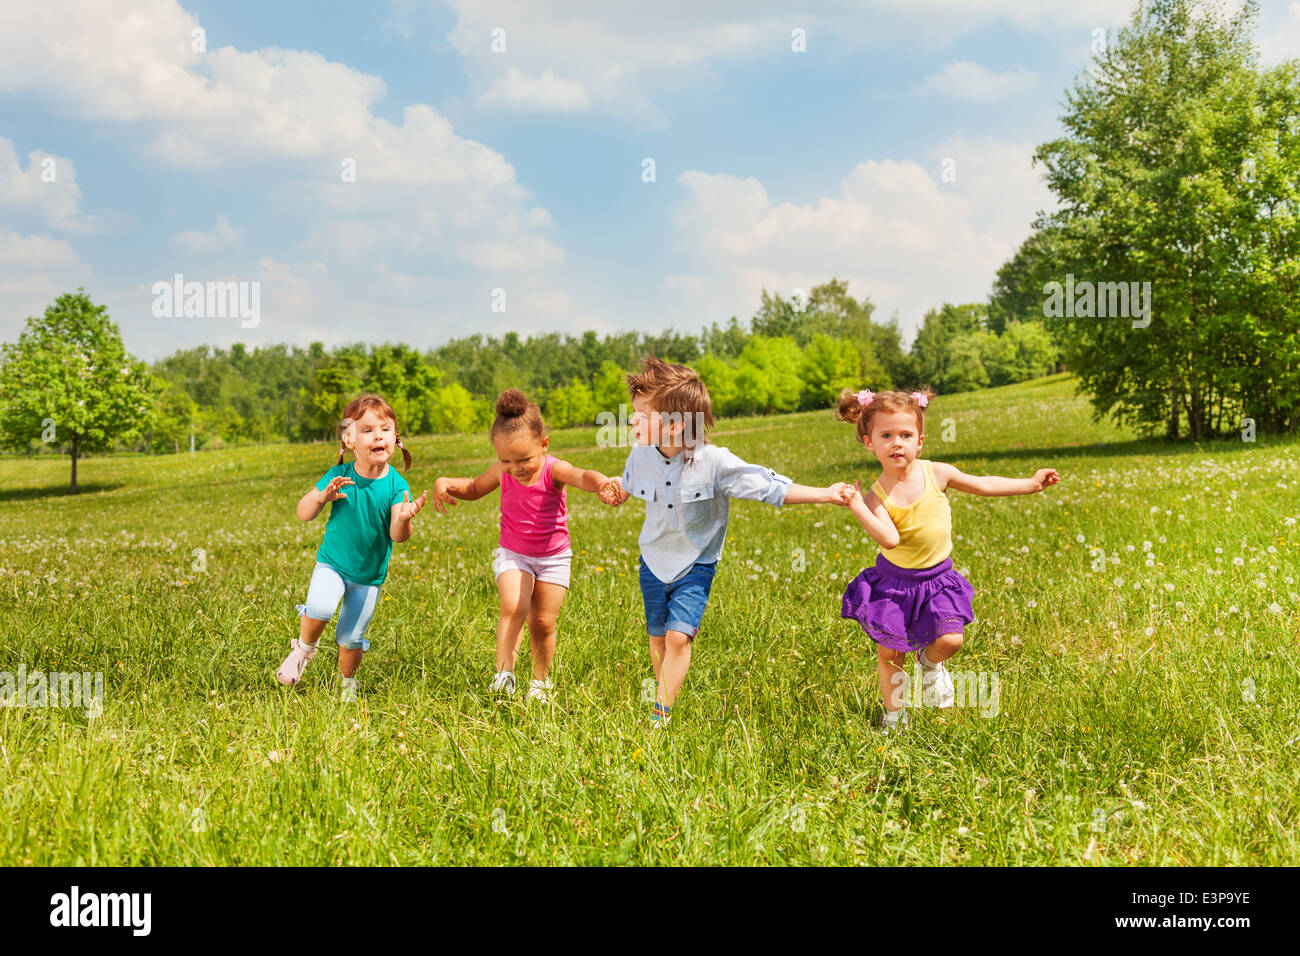 Four kids holding hands and standing together Stock Photo